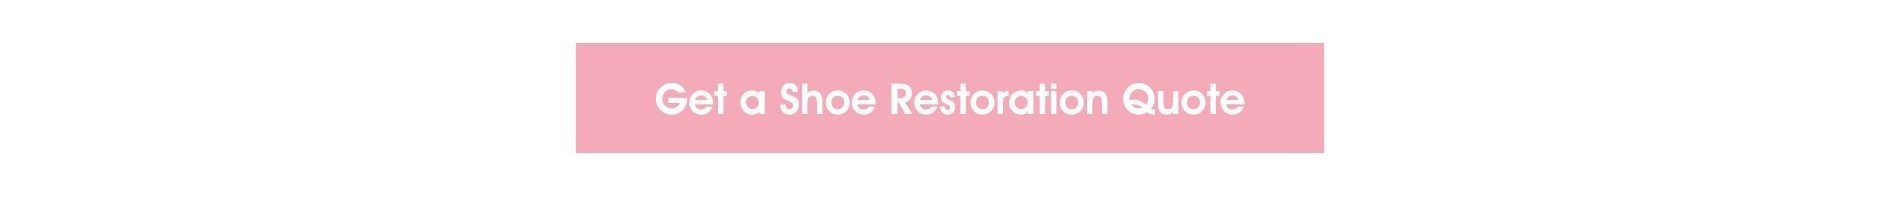 Complete your handbag restoration quote here for The Handbag Clinic 